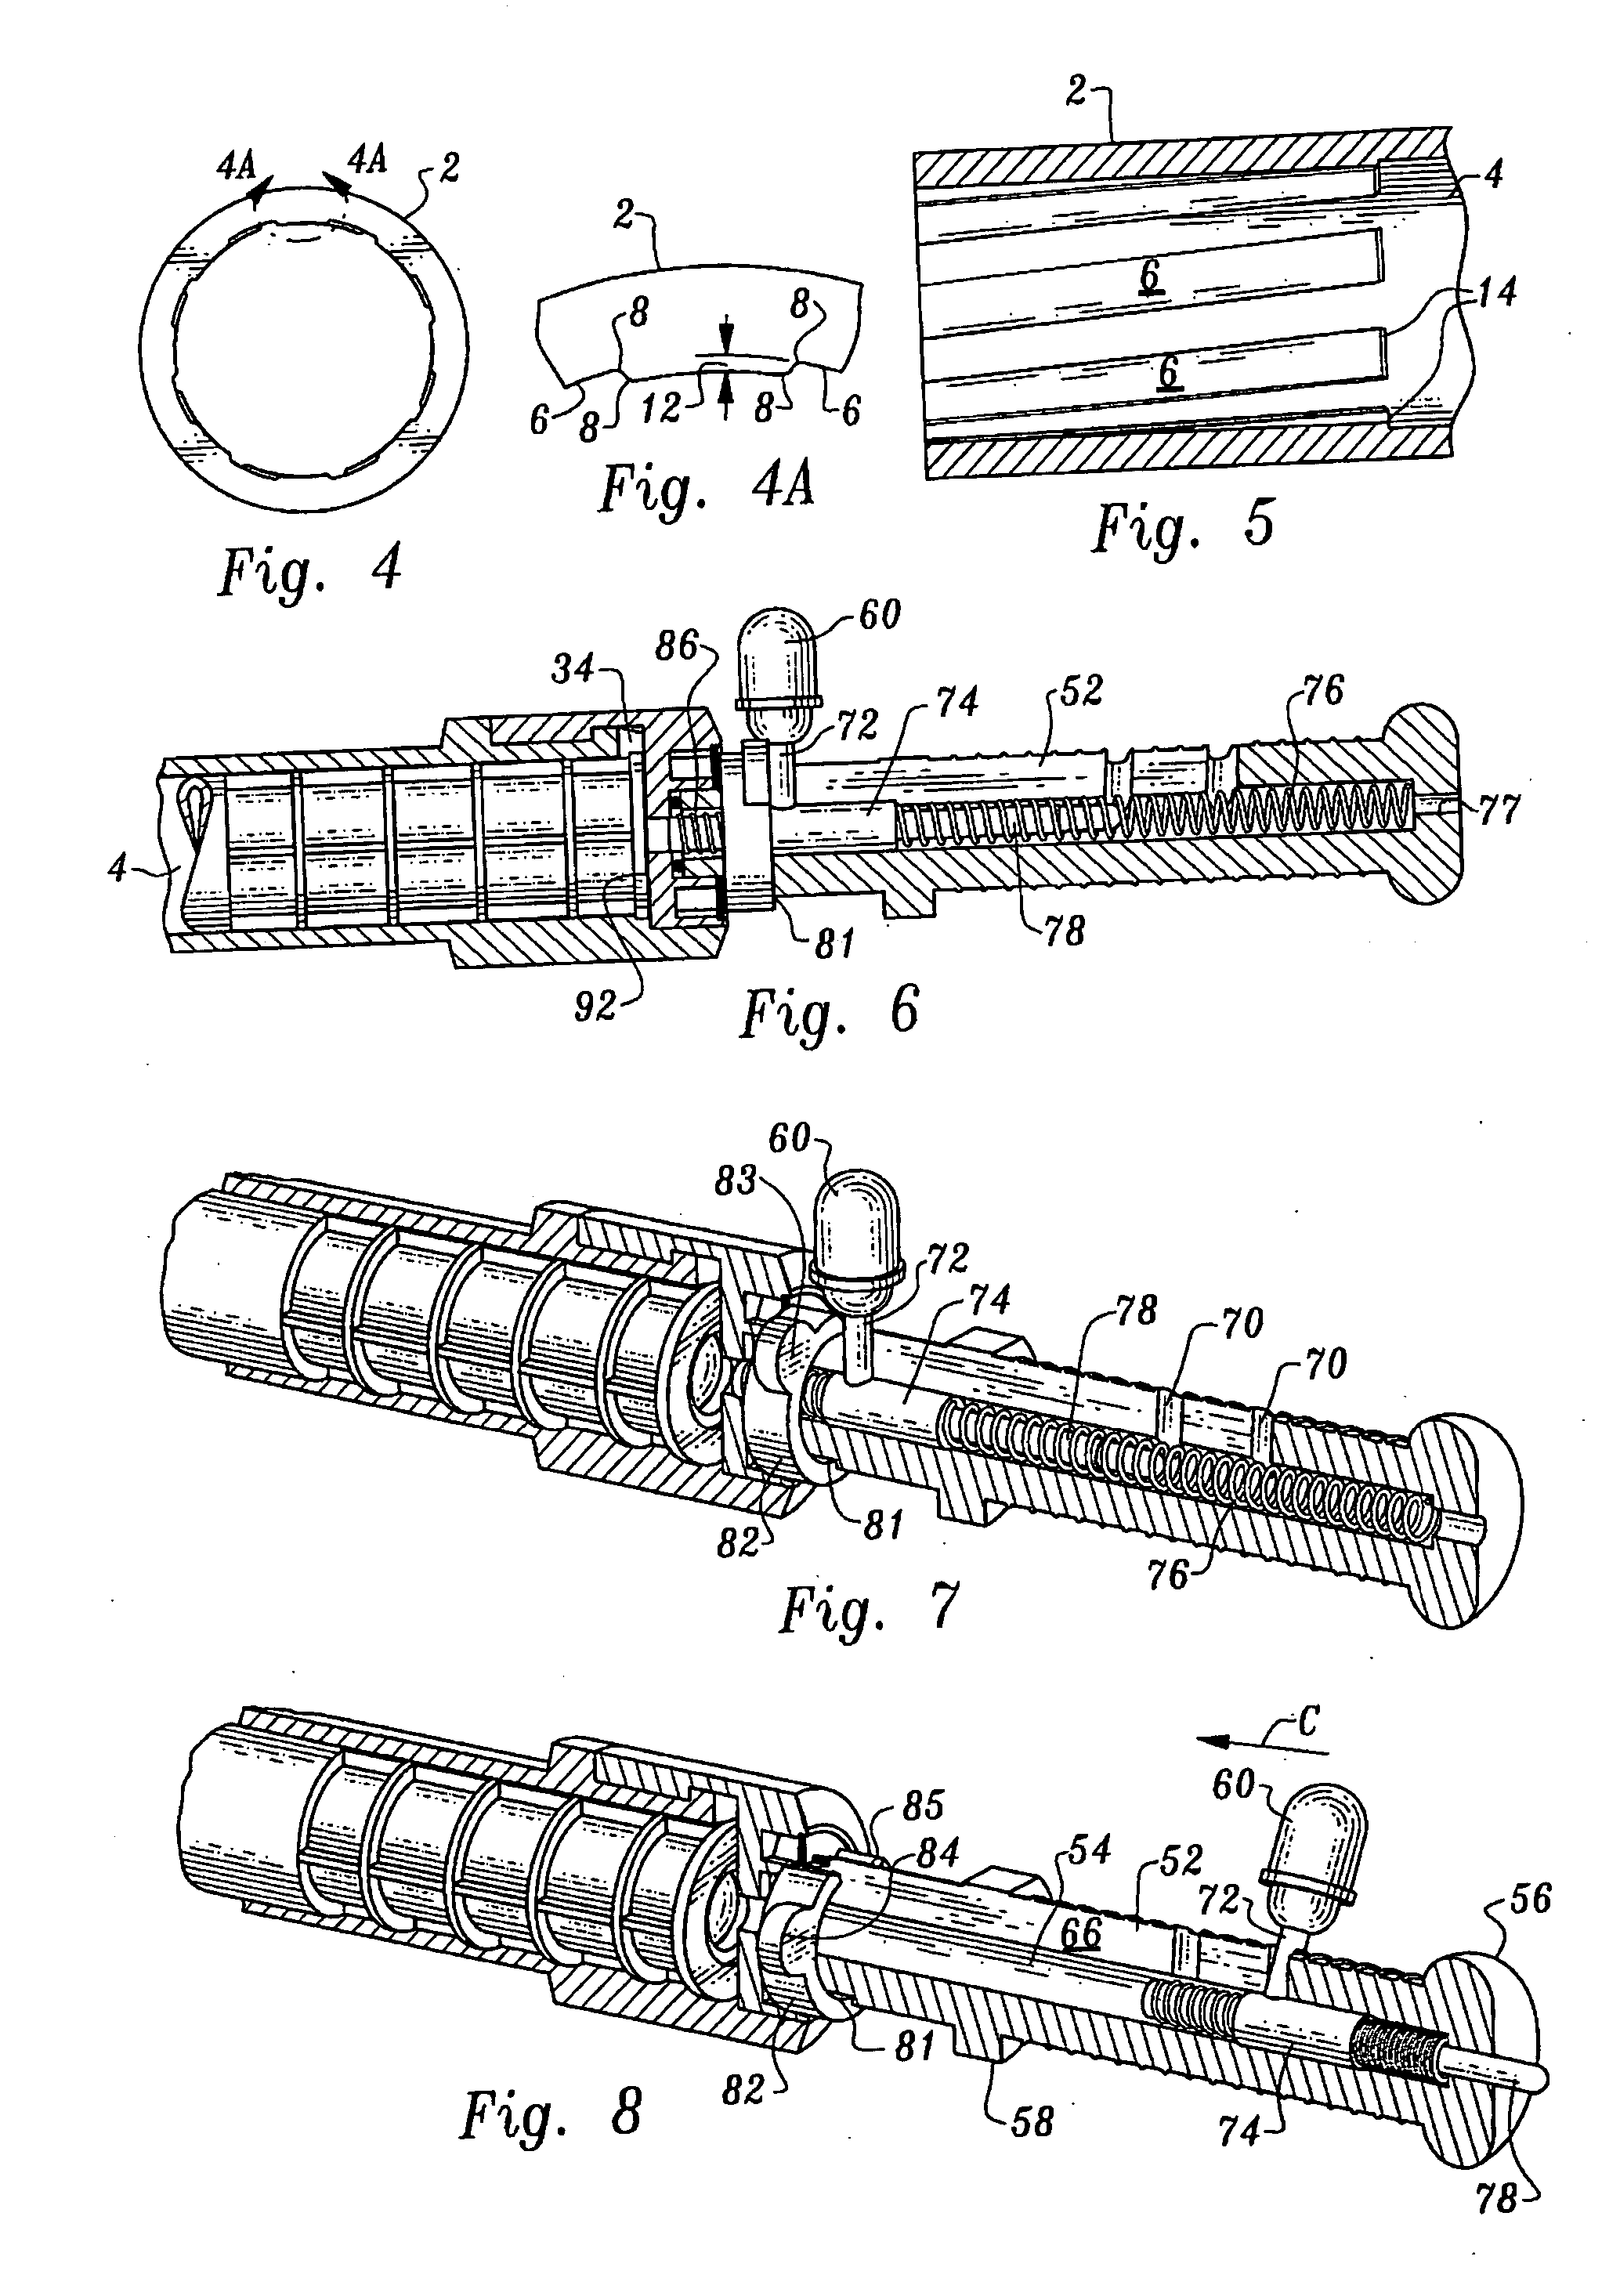 Handheld gas propelled missile launcher